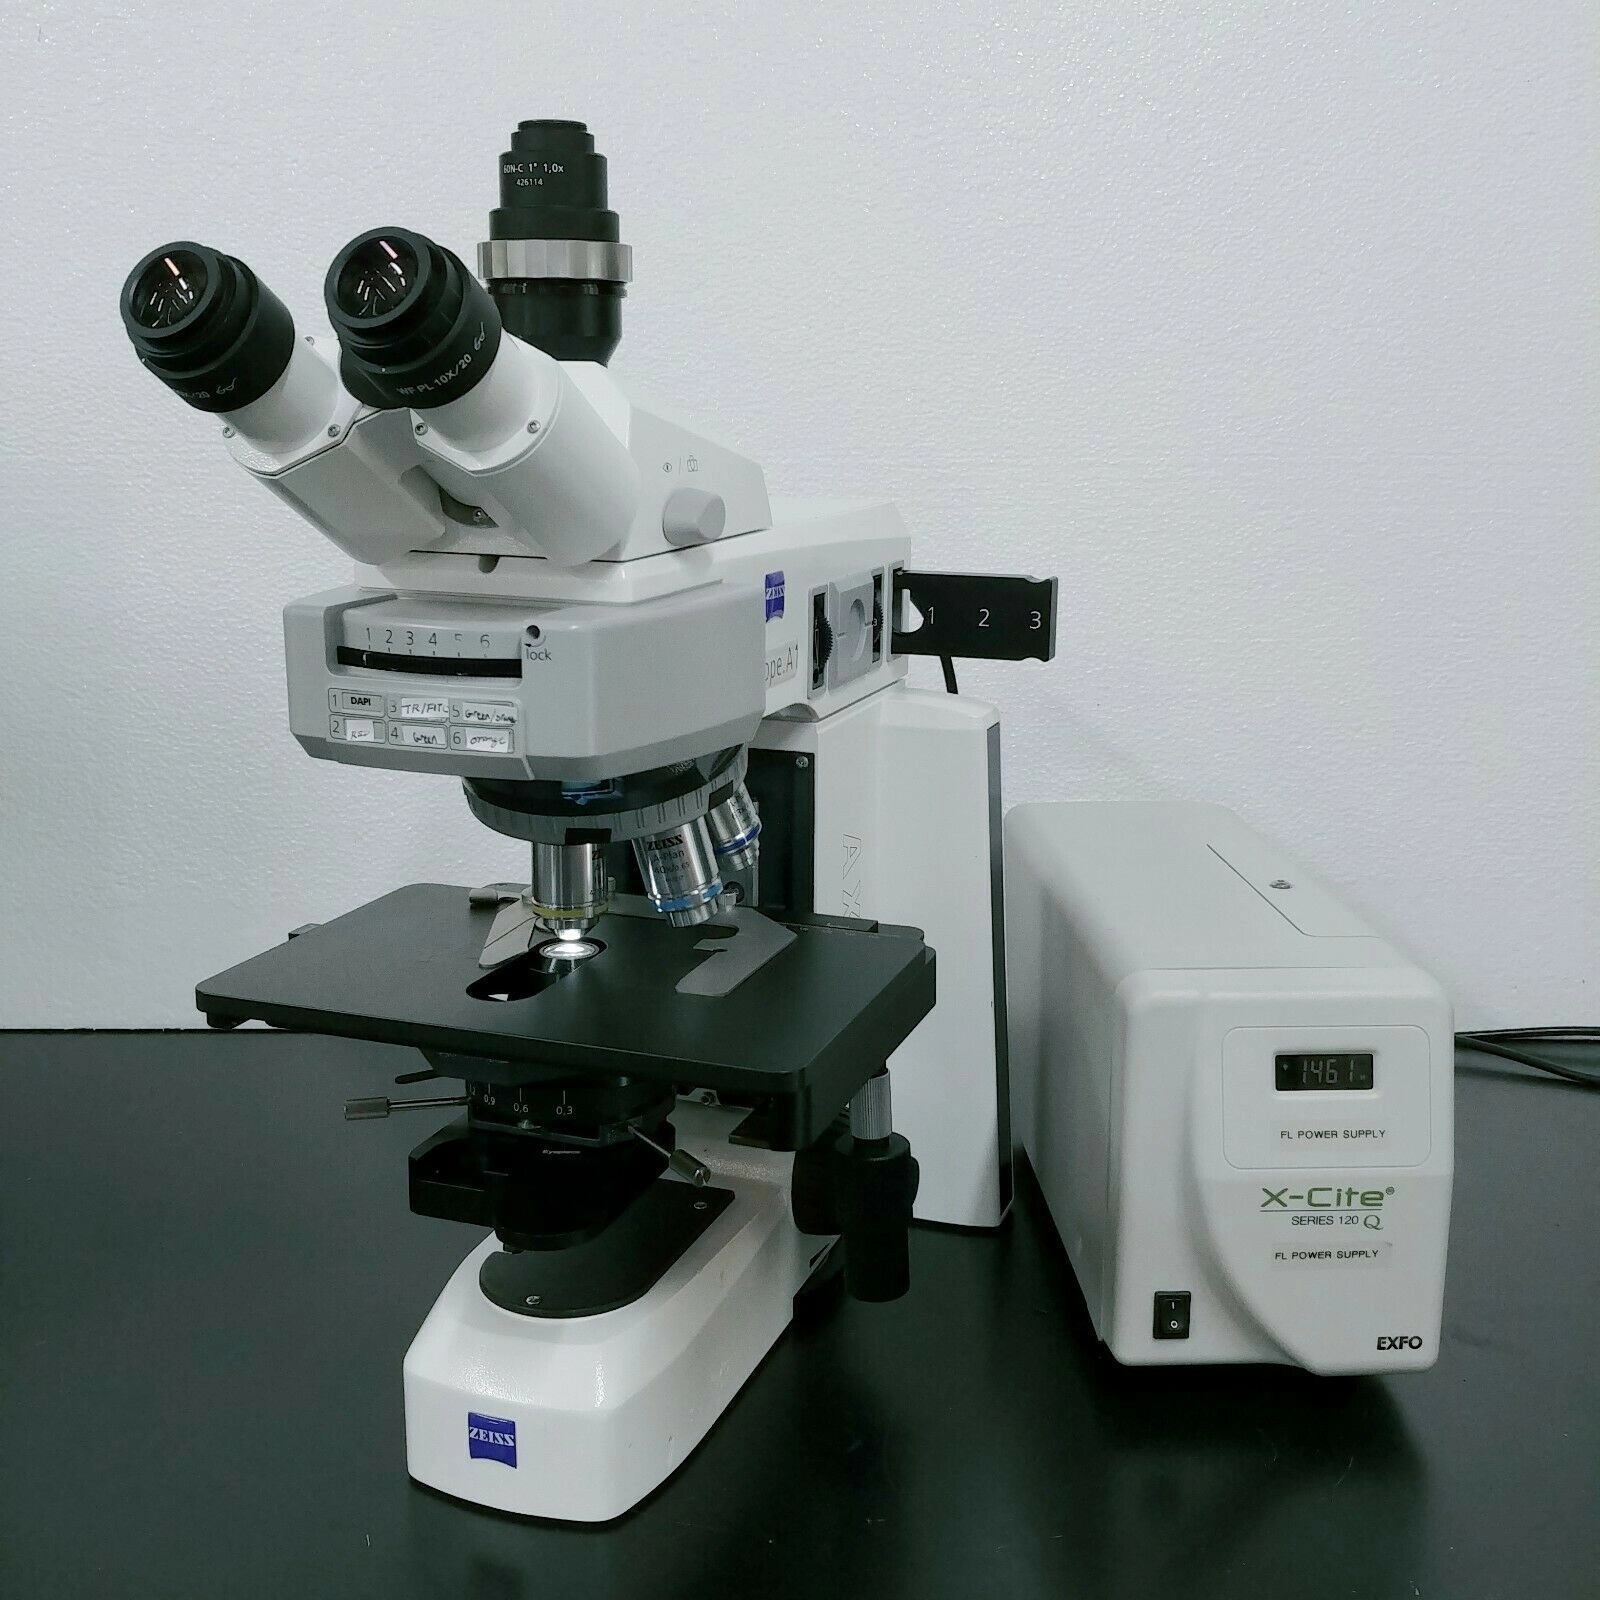 Zeiss Microscope AXIO Scope.A1 with Fluorescence